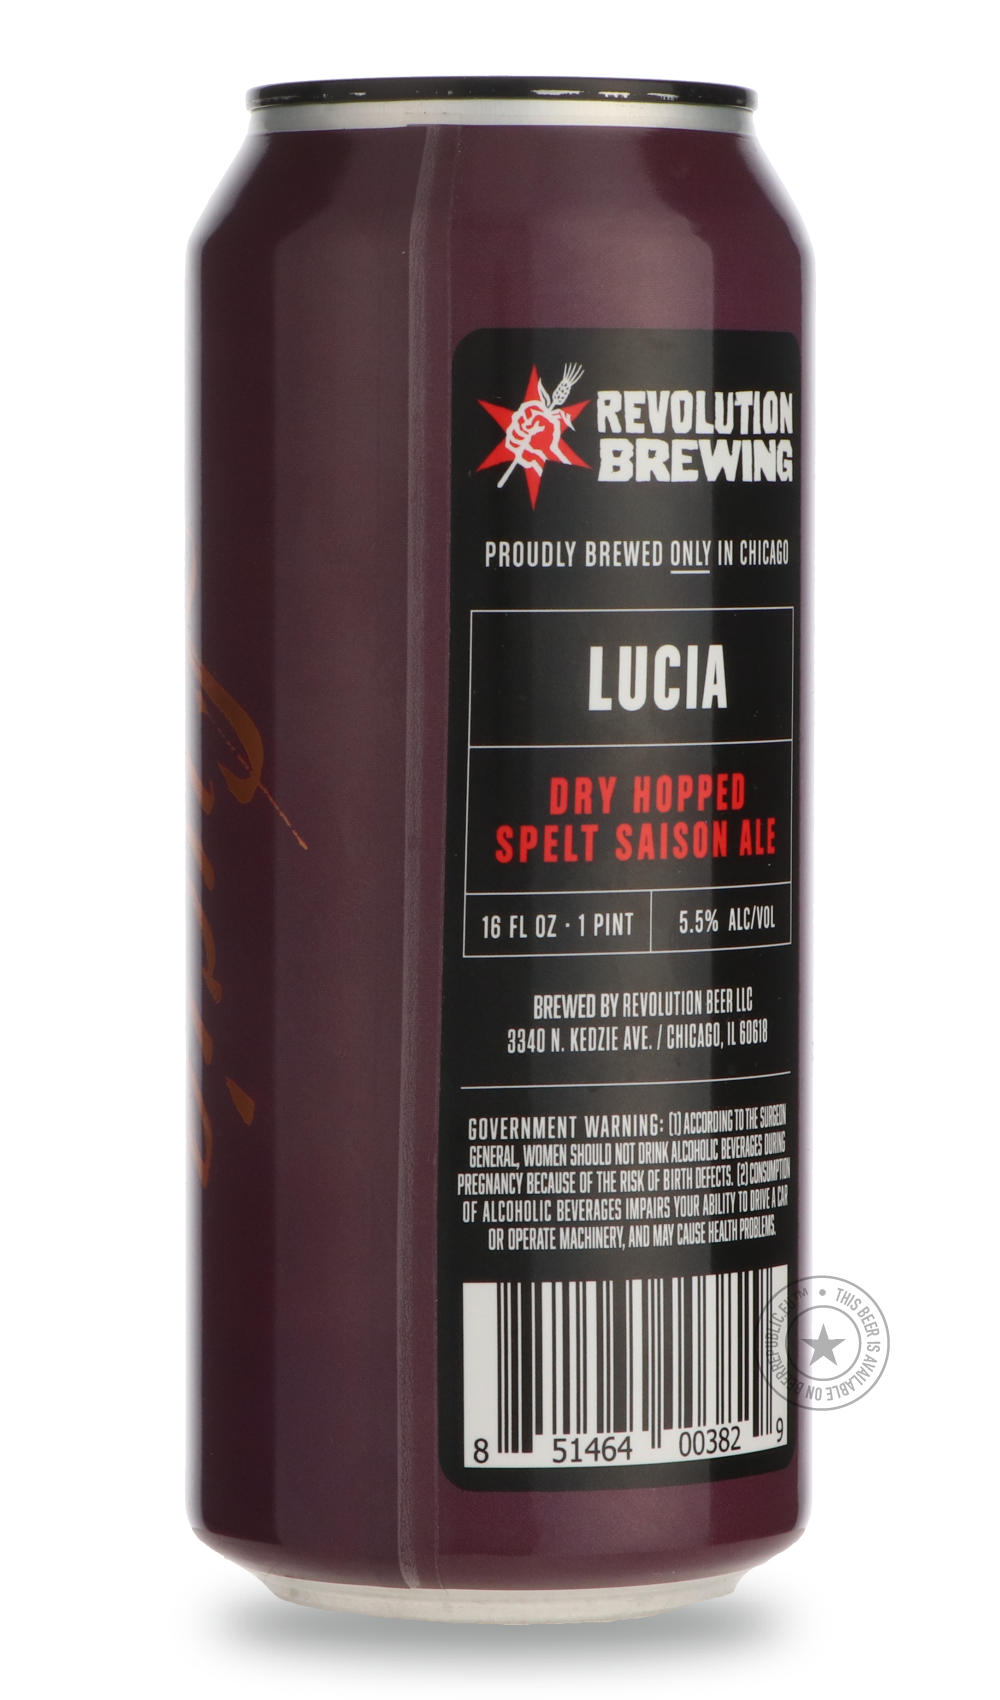 -Revolution- Lucia-Pale- Only @ Beer Republic - The best online beer store for American & Canadian craft beer - Buy beer online from the USA and Canada - Bier online kopen - Amerikaans bier kopen - Craft beer store - Craft beer kopen - Amerikanisch bier kaufen - Bier online kaufen - Acheter biere online - IPA - Stout - Porter - New England IPA - Hazy IPA - Imperial Stout - Barrel Aged - Barrel Aged Imperial Stout - Brown - Dark beer - Blond - Blonde - Pilsner - Lager - Wheat - Weizen - Amber - Barley Wine -